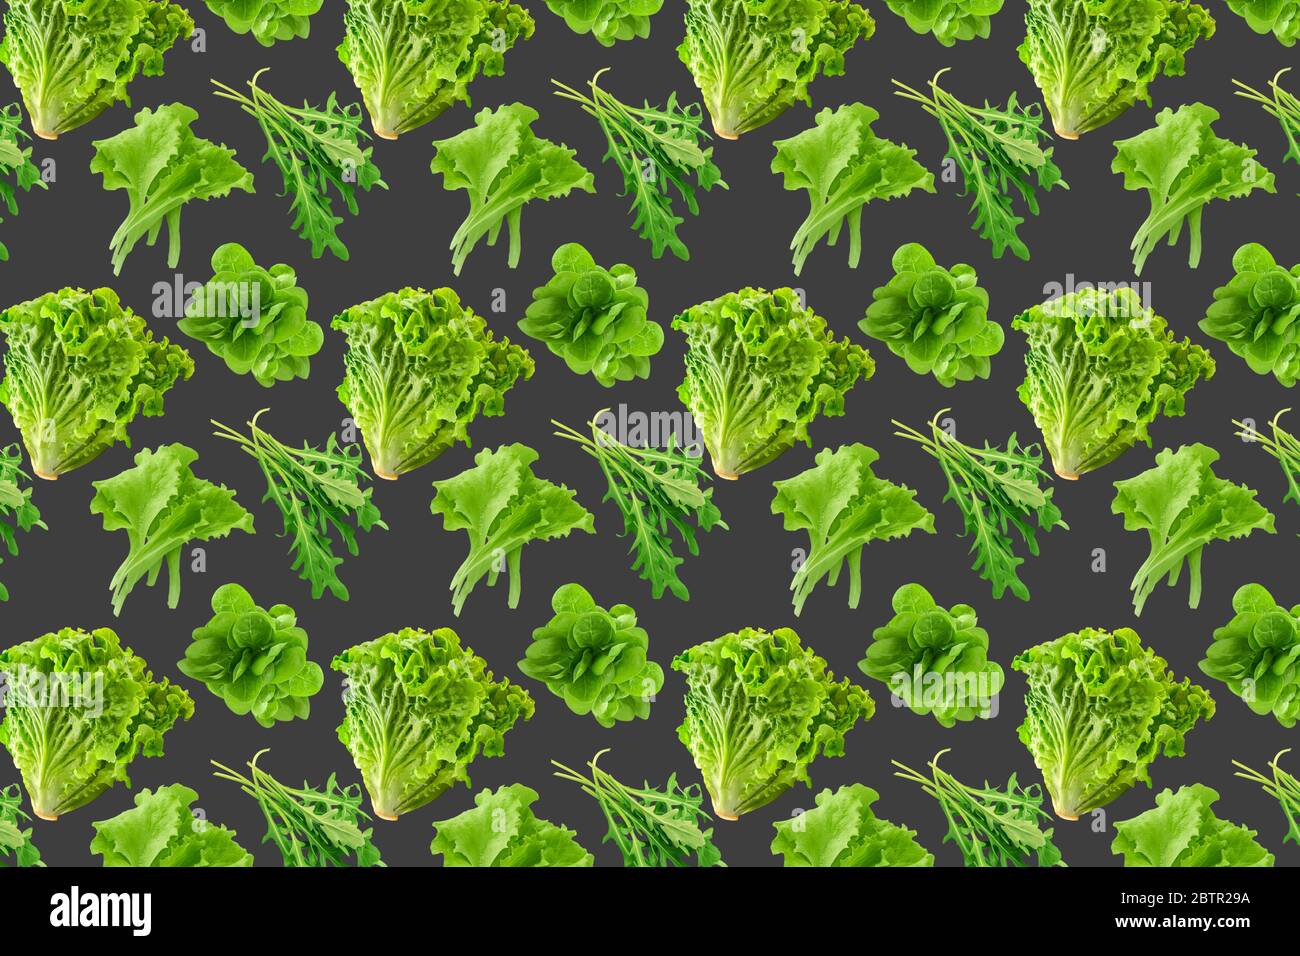 Seamless pattern of fresh salad leaves on grey background Stock Photo